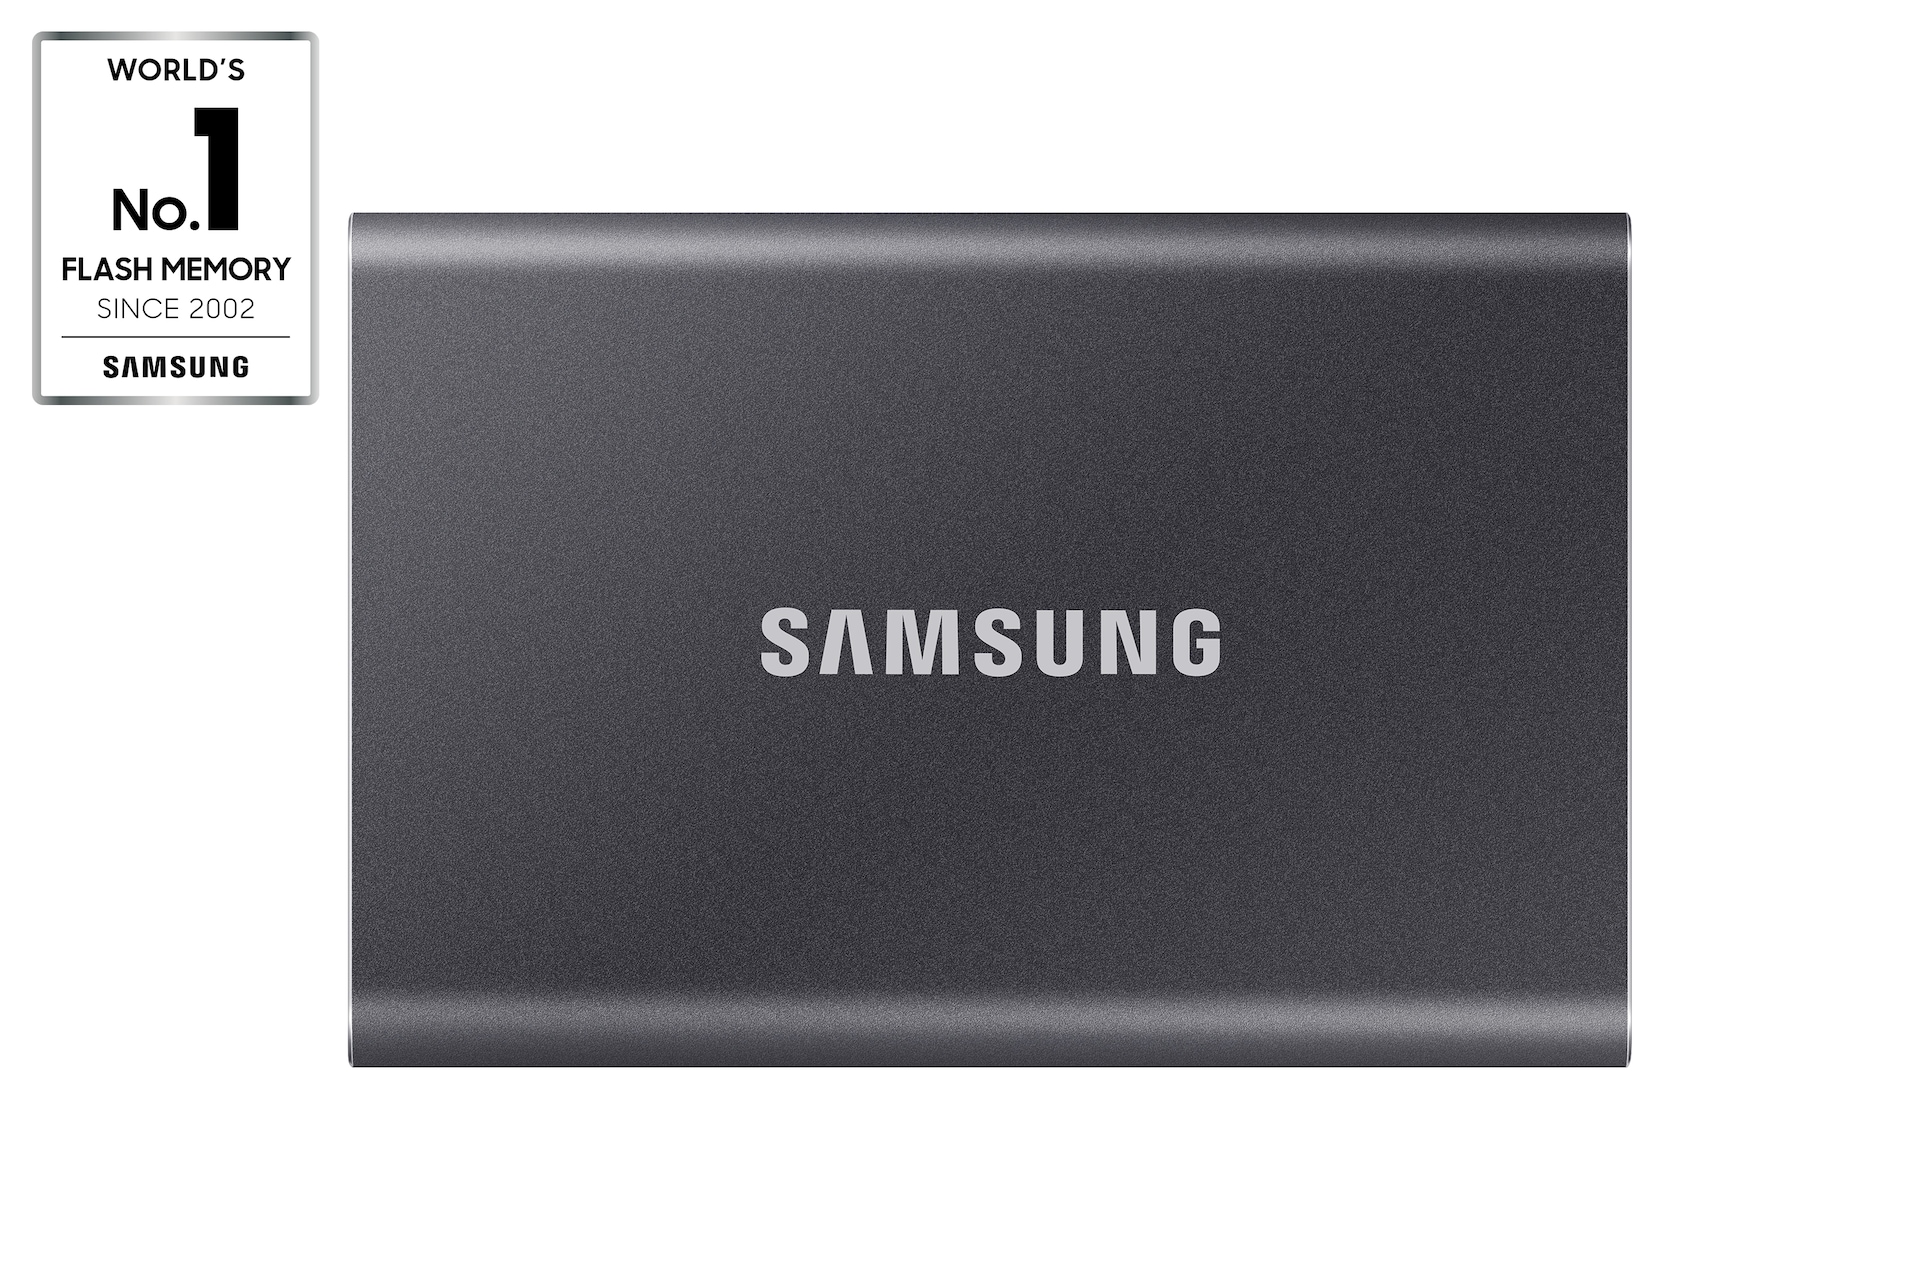  SAMSUNG SSD T7 Portable External Solid State Drive 1TB, Up to  USB 3.2 Gen 2, Reliable Storage for Gaming, Students, Professionals,  MU-PC1T0H/AM, Blue : Electronics